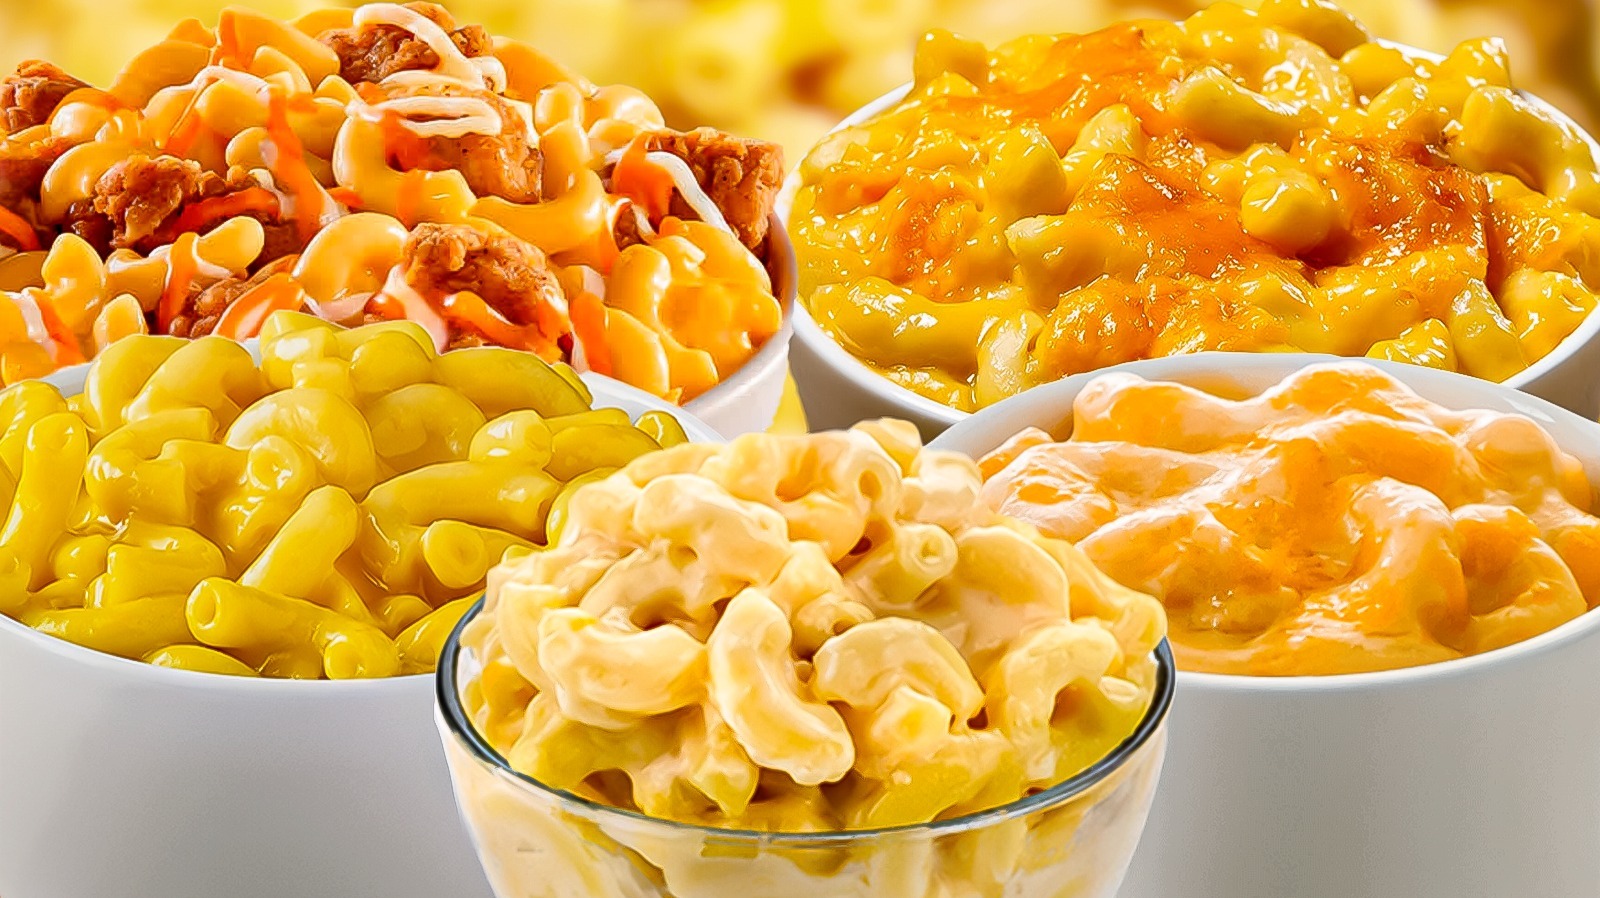 https://www.tastingtable.com/img/gallery/ranking-fast-food-mac-and-cheese-from-worst-to-best/l-intro-1681155489.jpg